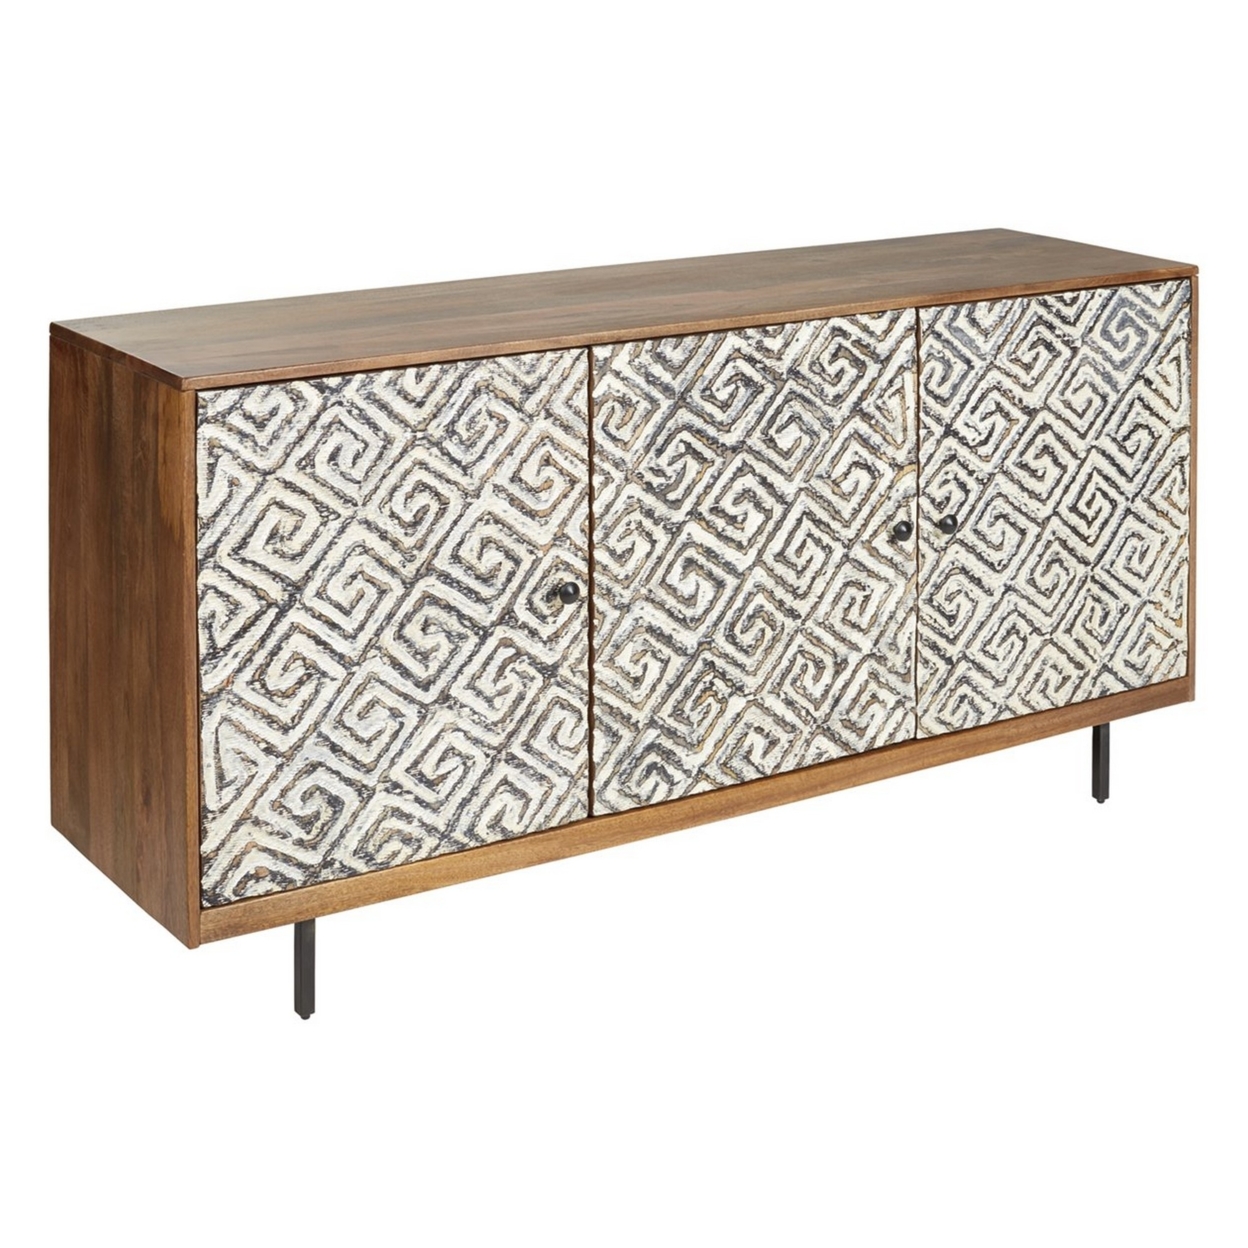 3 Door Wooden Accent Cabinet With Carved Trellis Motif, Brown And Off White- Saltoro Sherpi